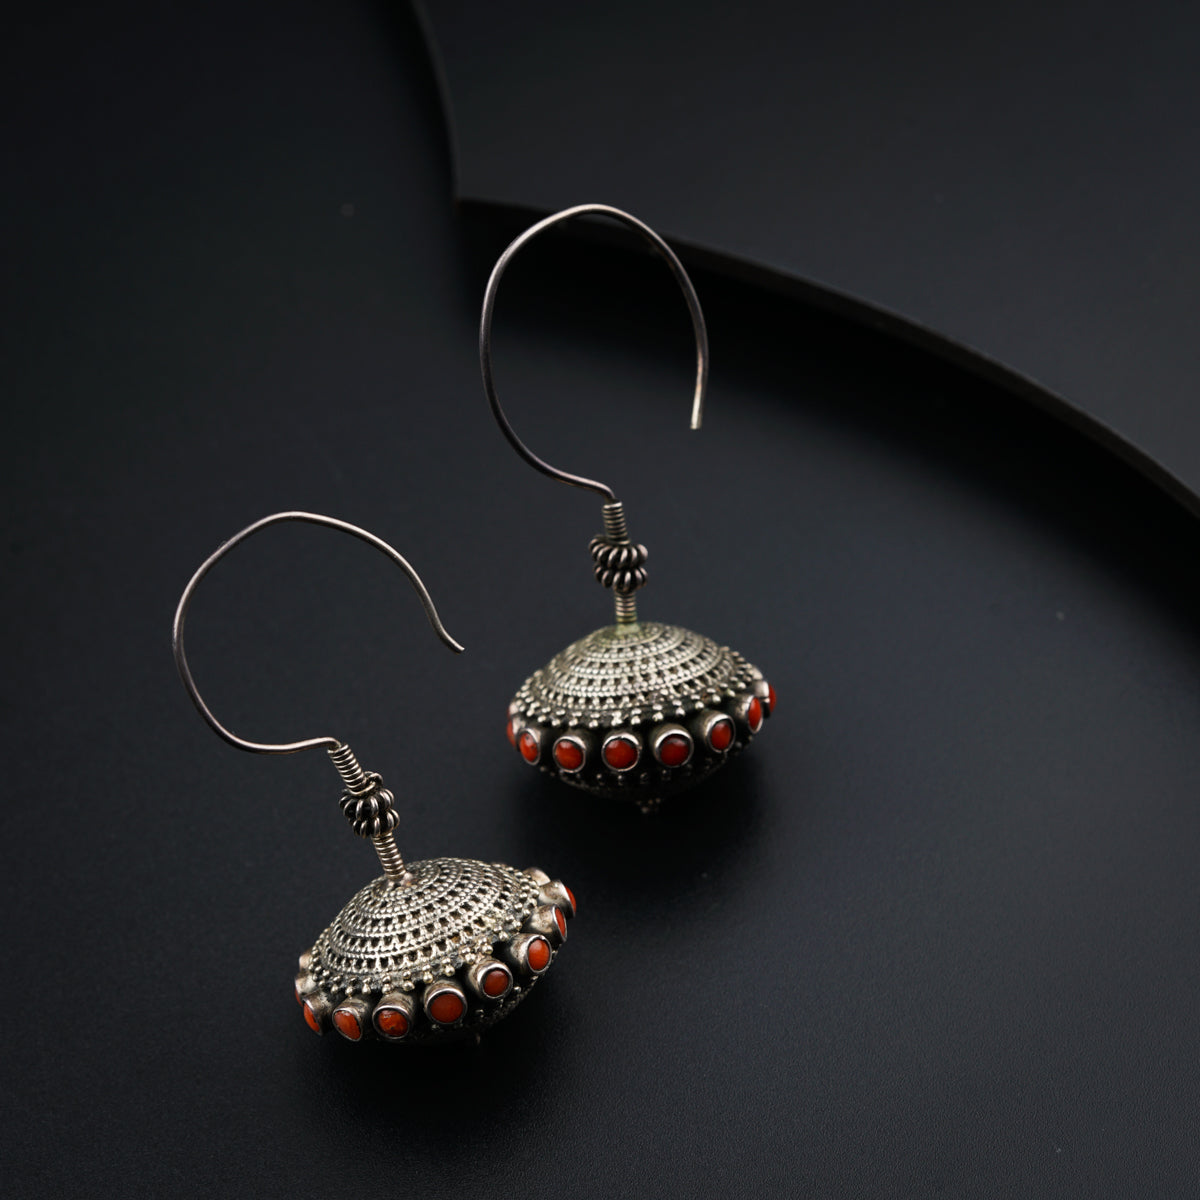 a pair of silver and red earrings on a black surface